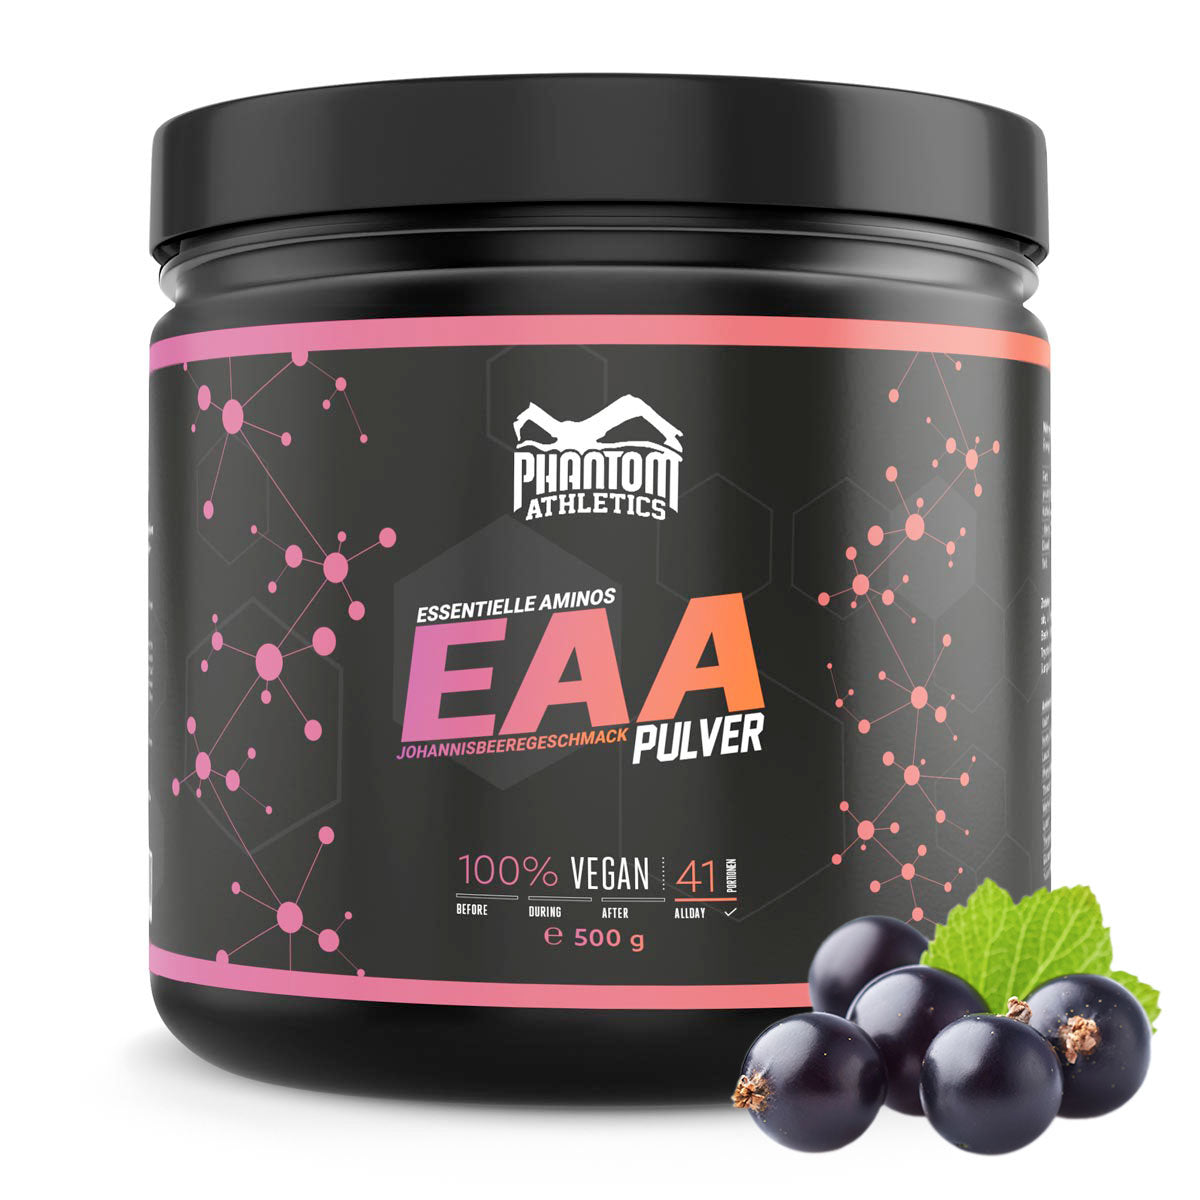 Phantom EAA - Essential Amino Acids with Blackcurrant Flavor. For optimal care in martial arts.